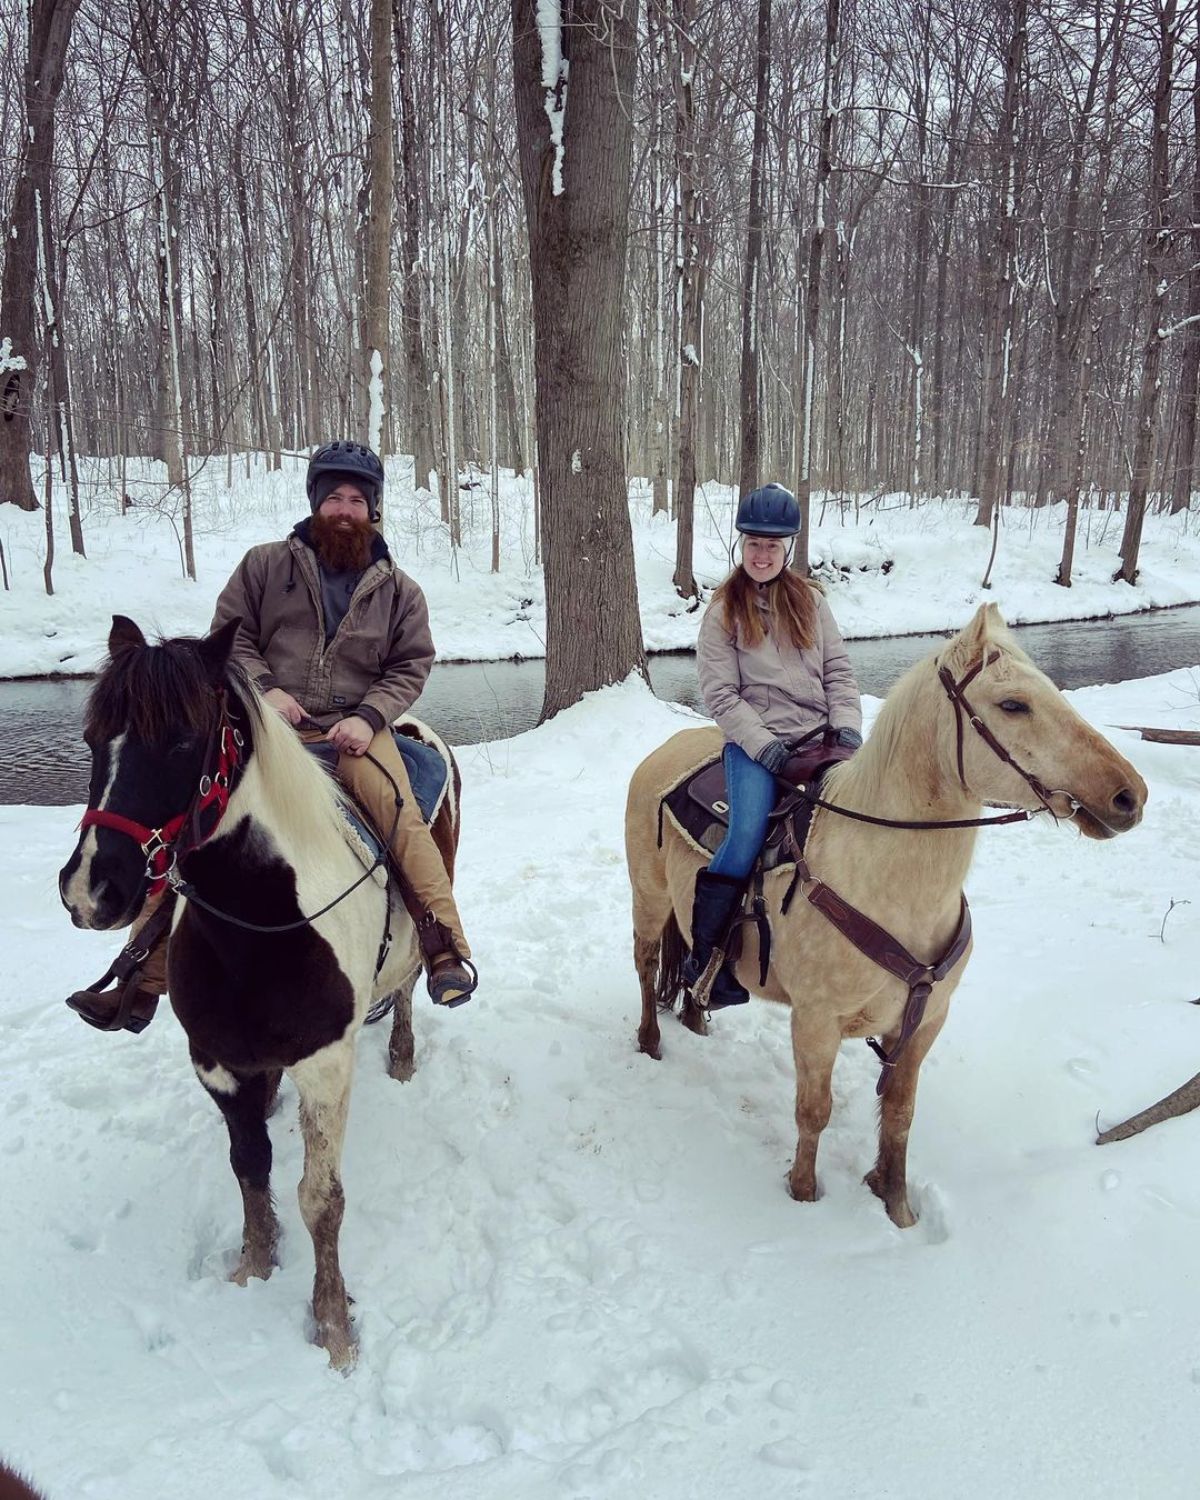 A young couple enjoys a horse ride during the winter.